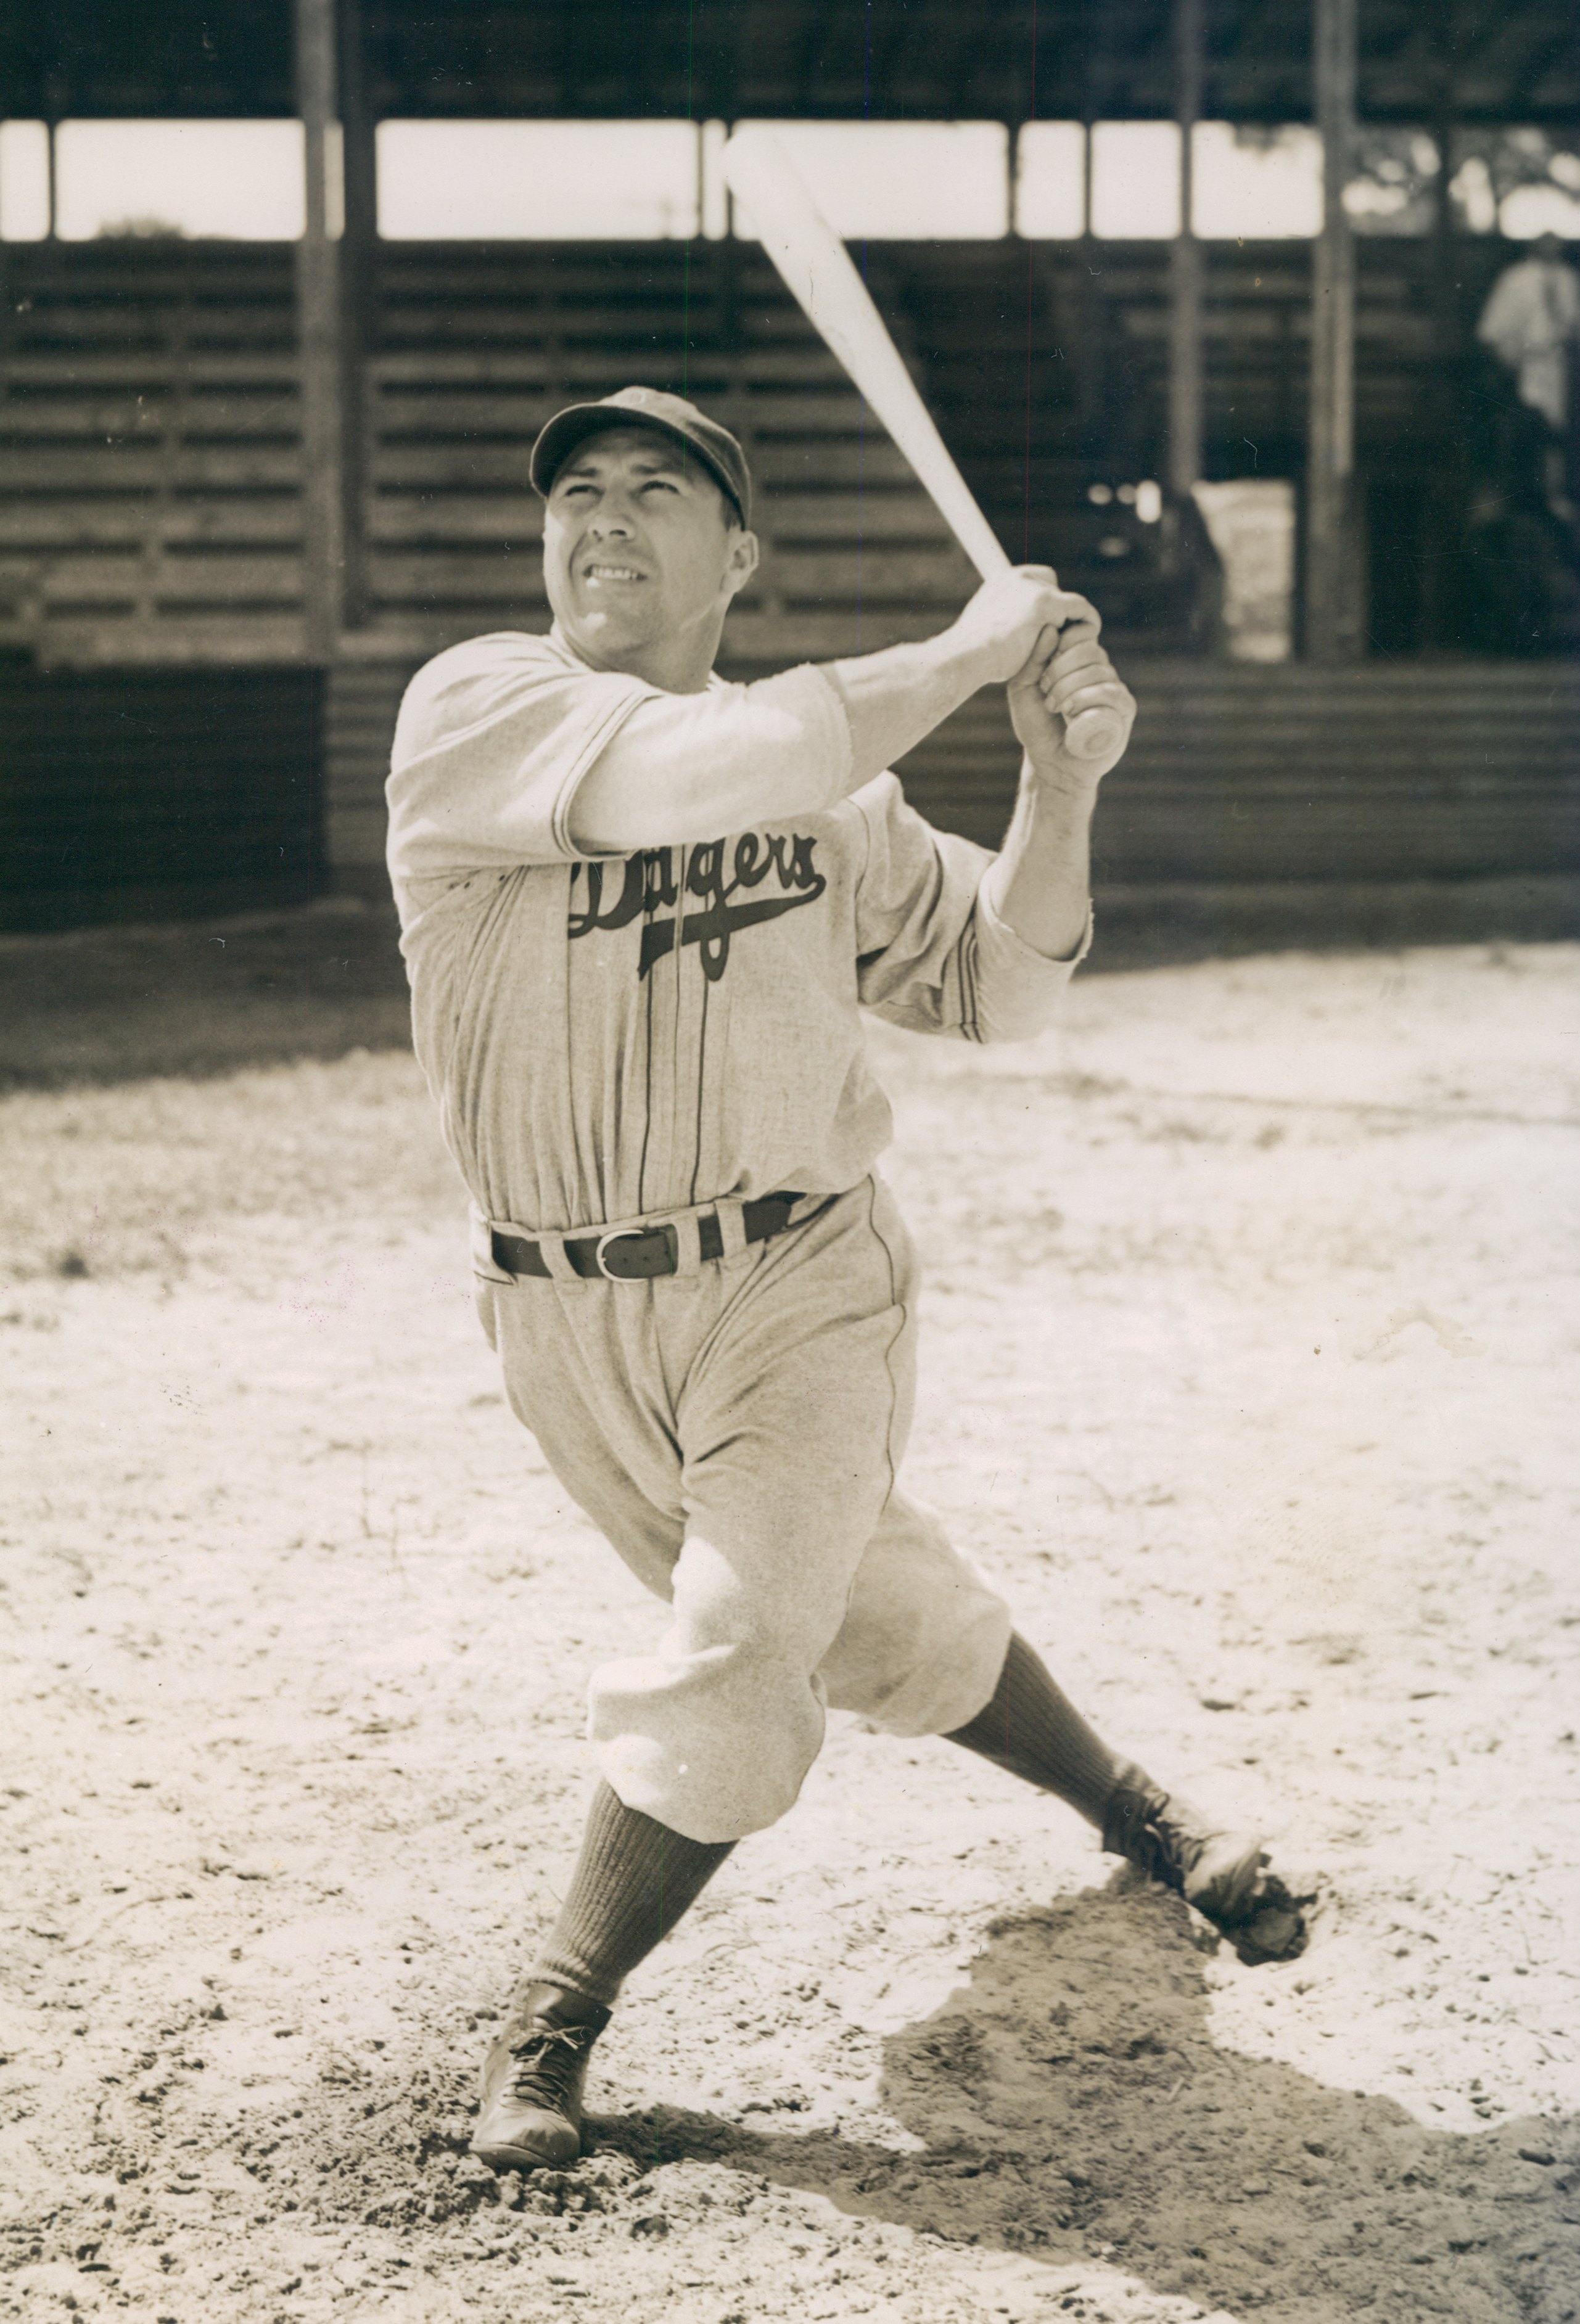 Ernie Koy played three seasons for the Brooklyn Dodgers, and hit a home run in his first major league at-bat in 1938, the first position player in franchise history to do so.